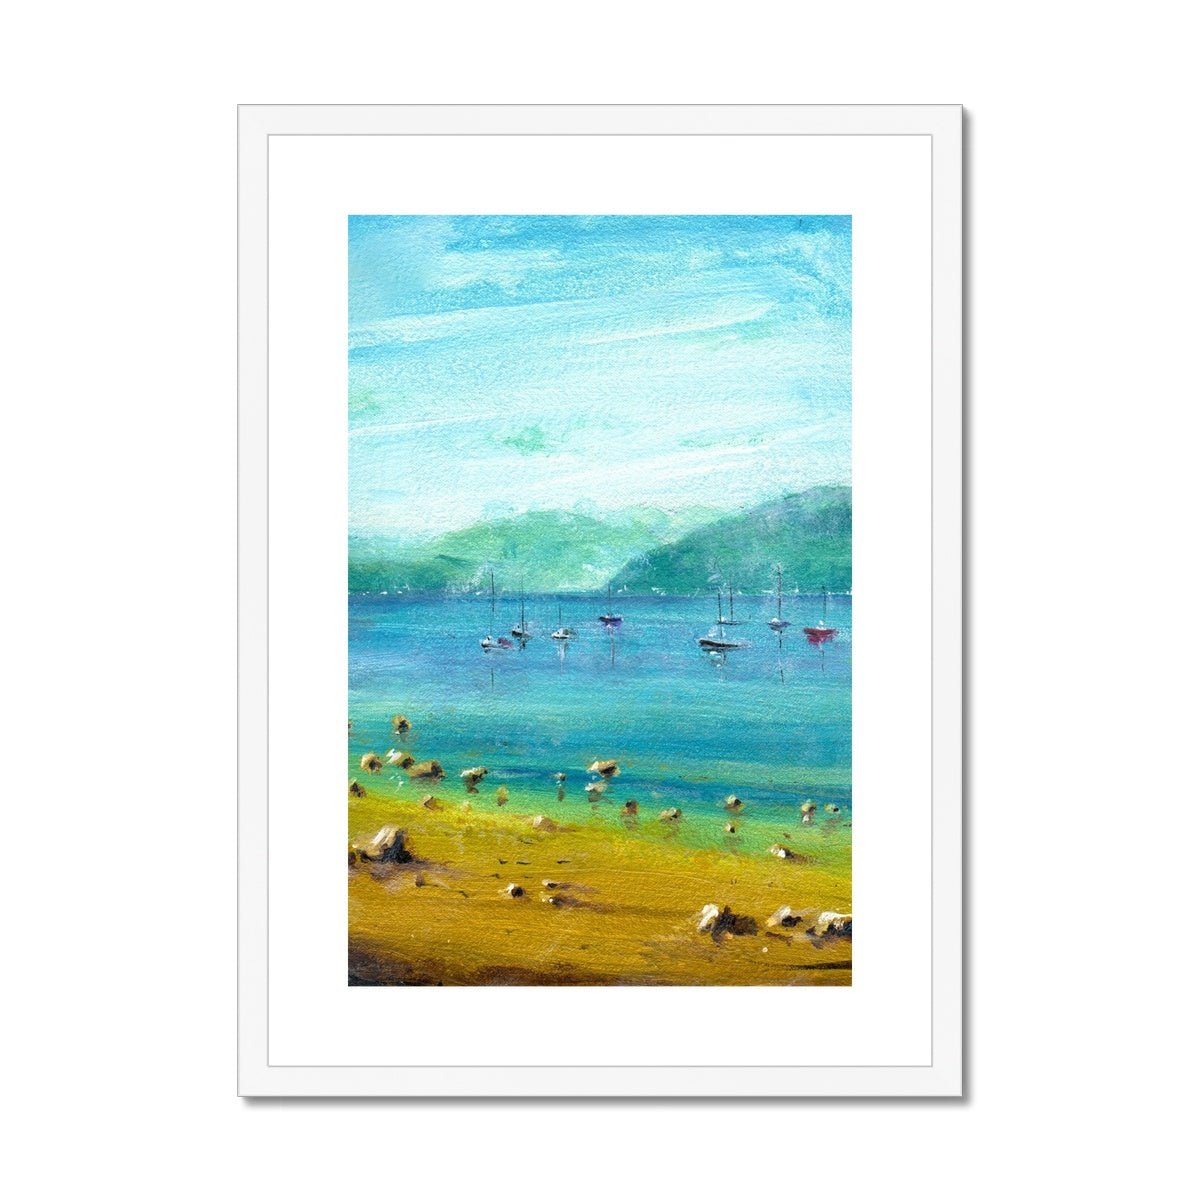 A Summer Day On The Clyde Painting | Framed & Mounted Prints From Scotland-Framed & Mounted Prints-River Clyde Art Gallery-A2 Portrait-White Frame-Paintings, Prints, Homeware, Art Gifts From Scotland By Scottish Artist Kevin Hunter